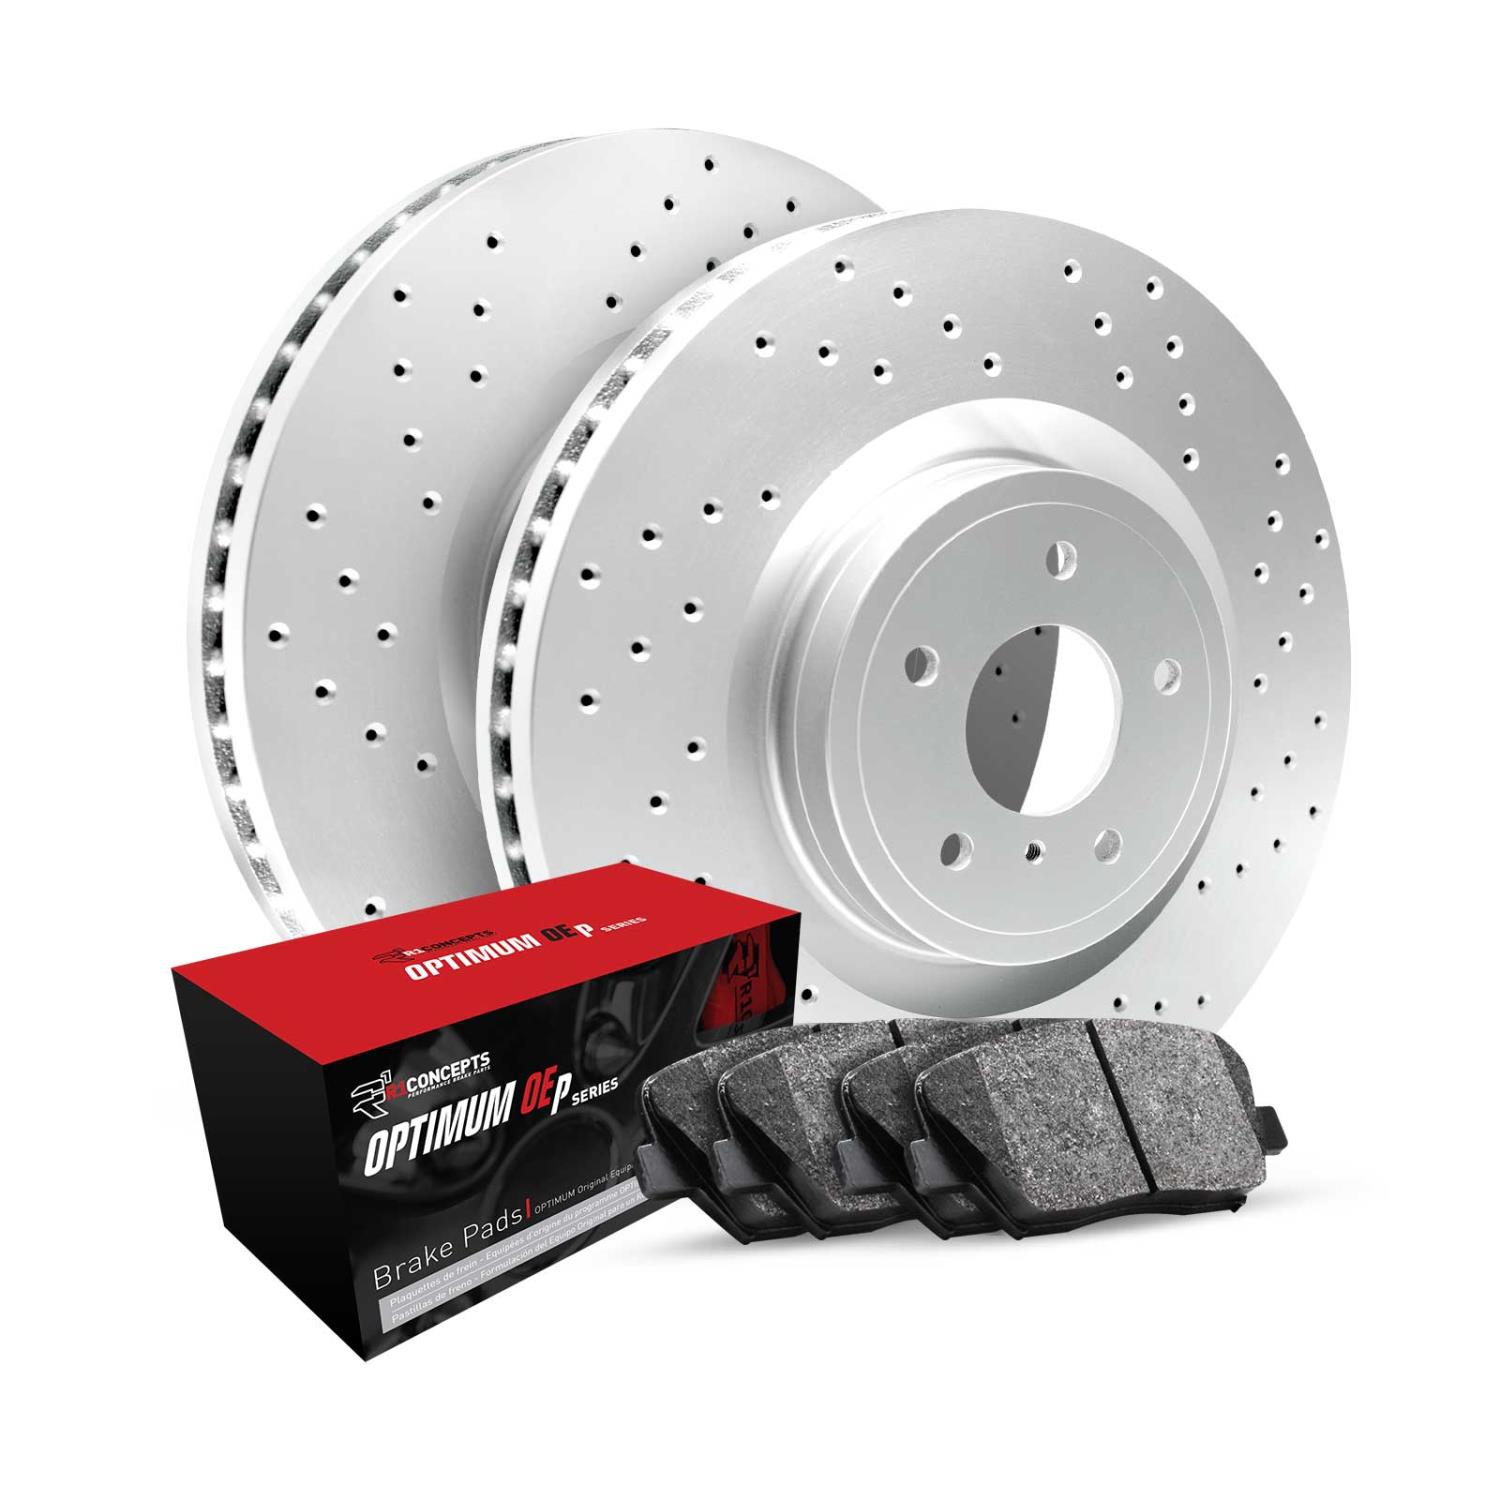 GEO-Carbon Drilled Brake Rotor Set w/Optimum OE Pads, 2009-2016 Fits Multiple Makes/Models, Position: Rear